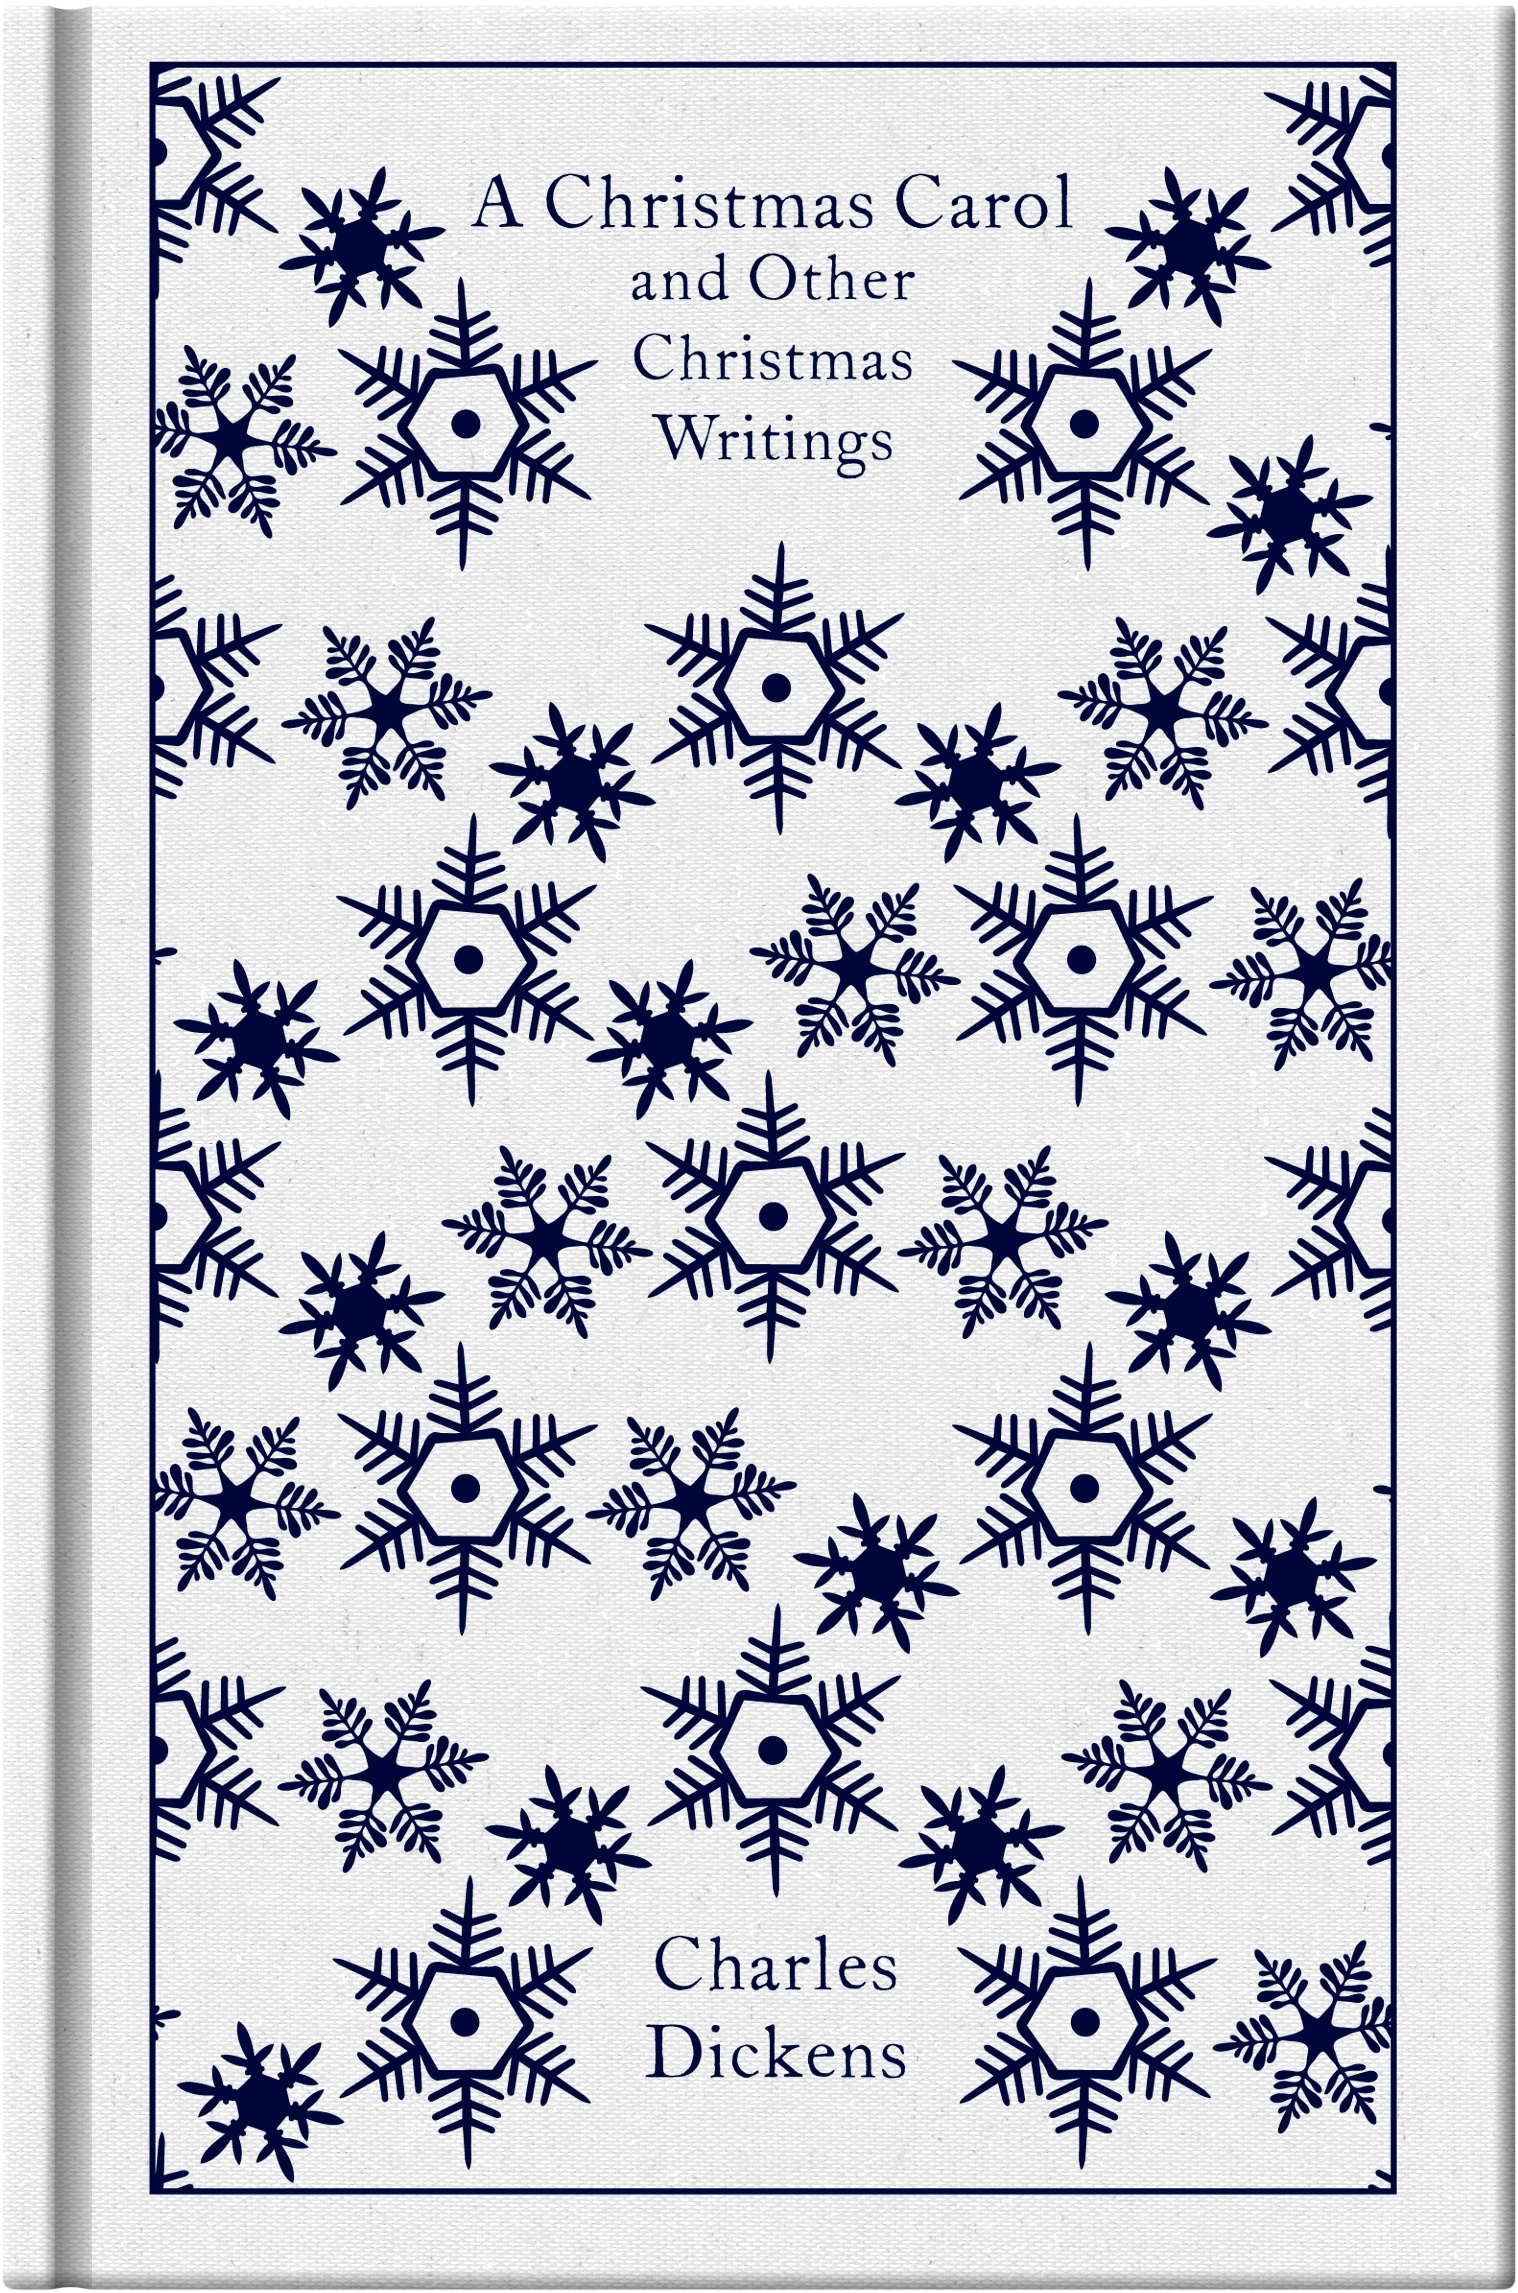 Book “A Christmas Carol and Other Christmas Writings” by Charles Dickens — November 25, 2010